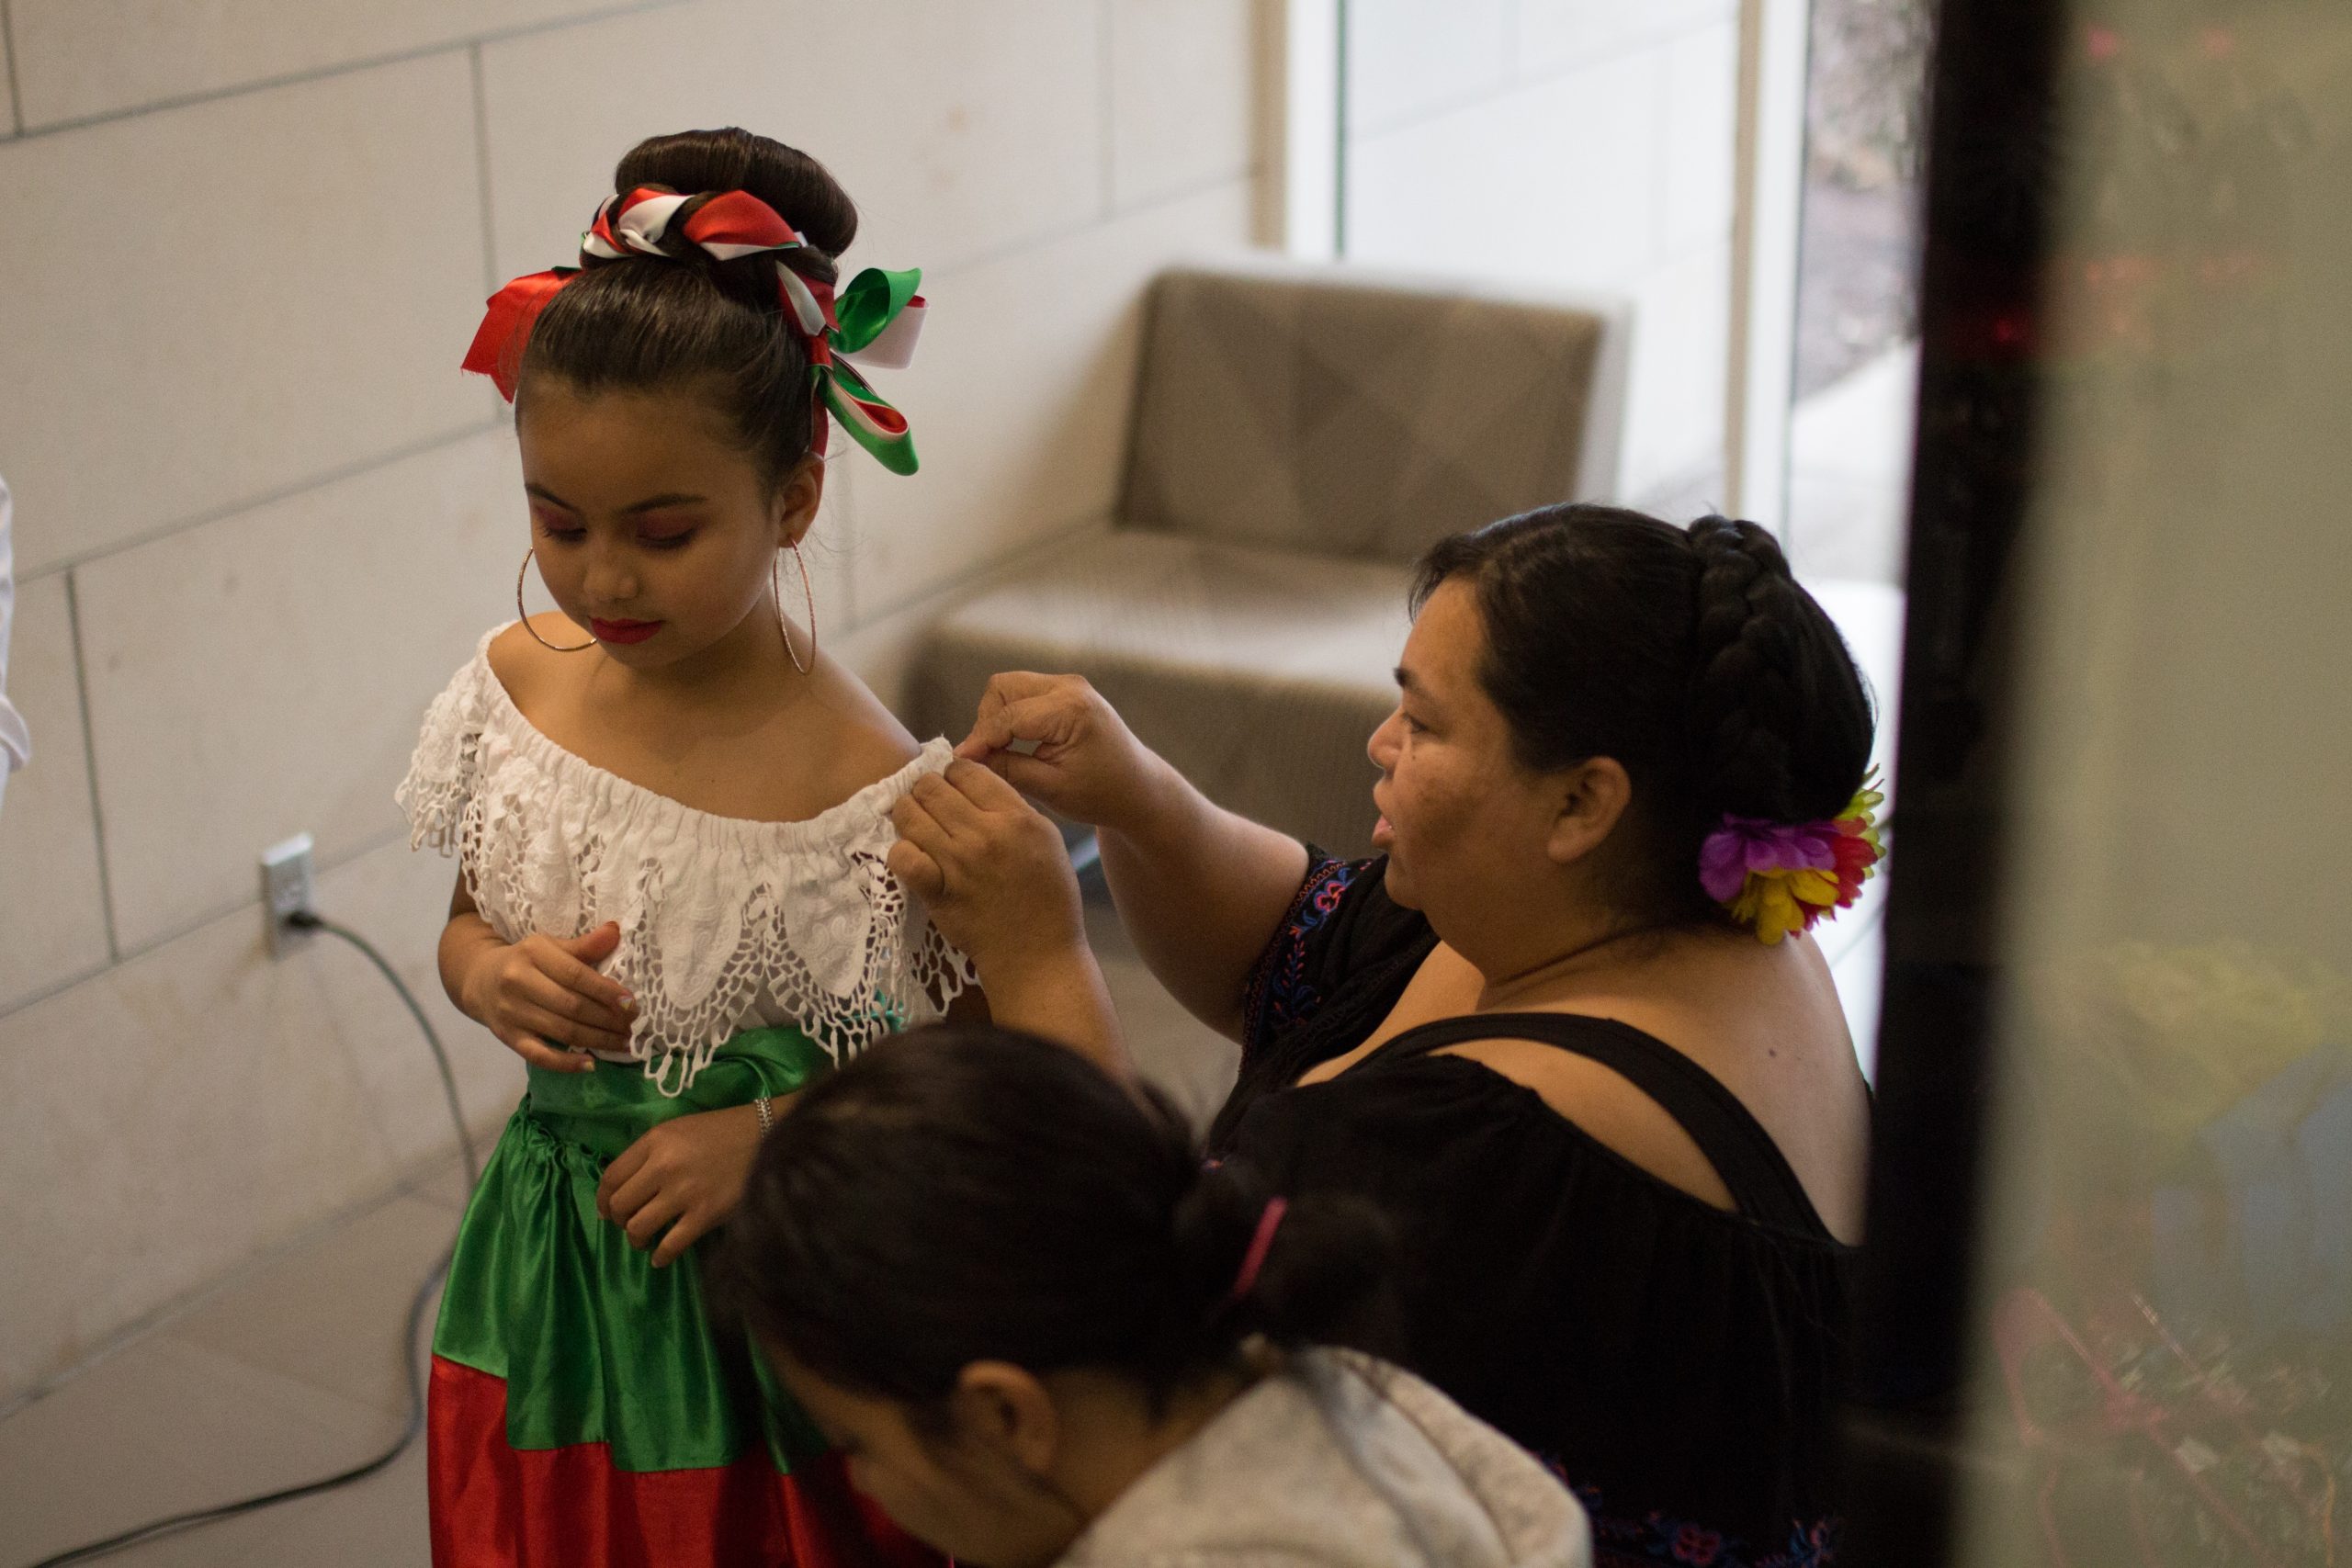 Maria repairing a dress for one of the dancers.